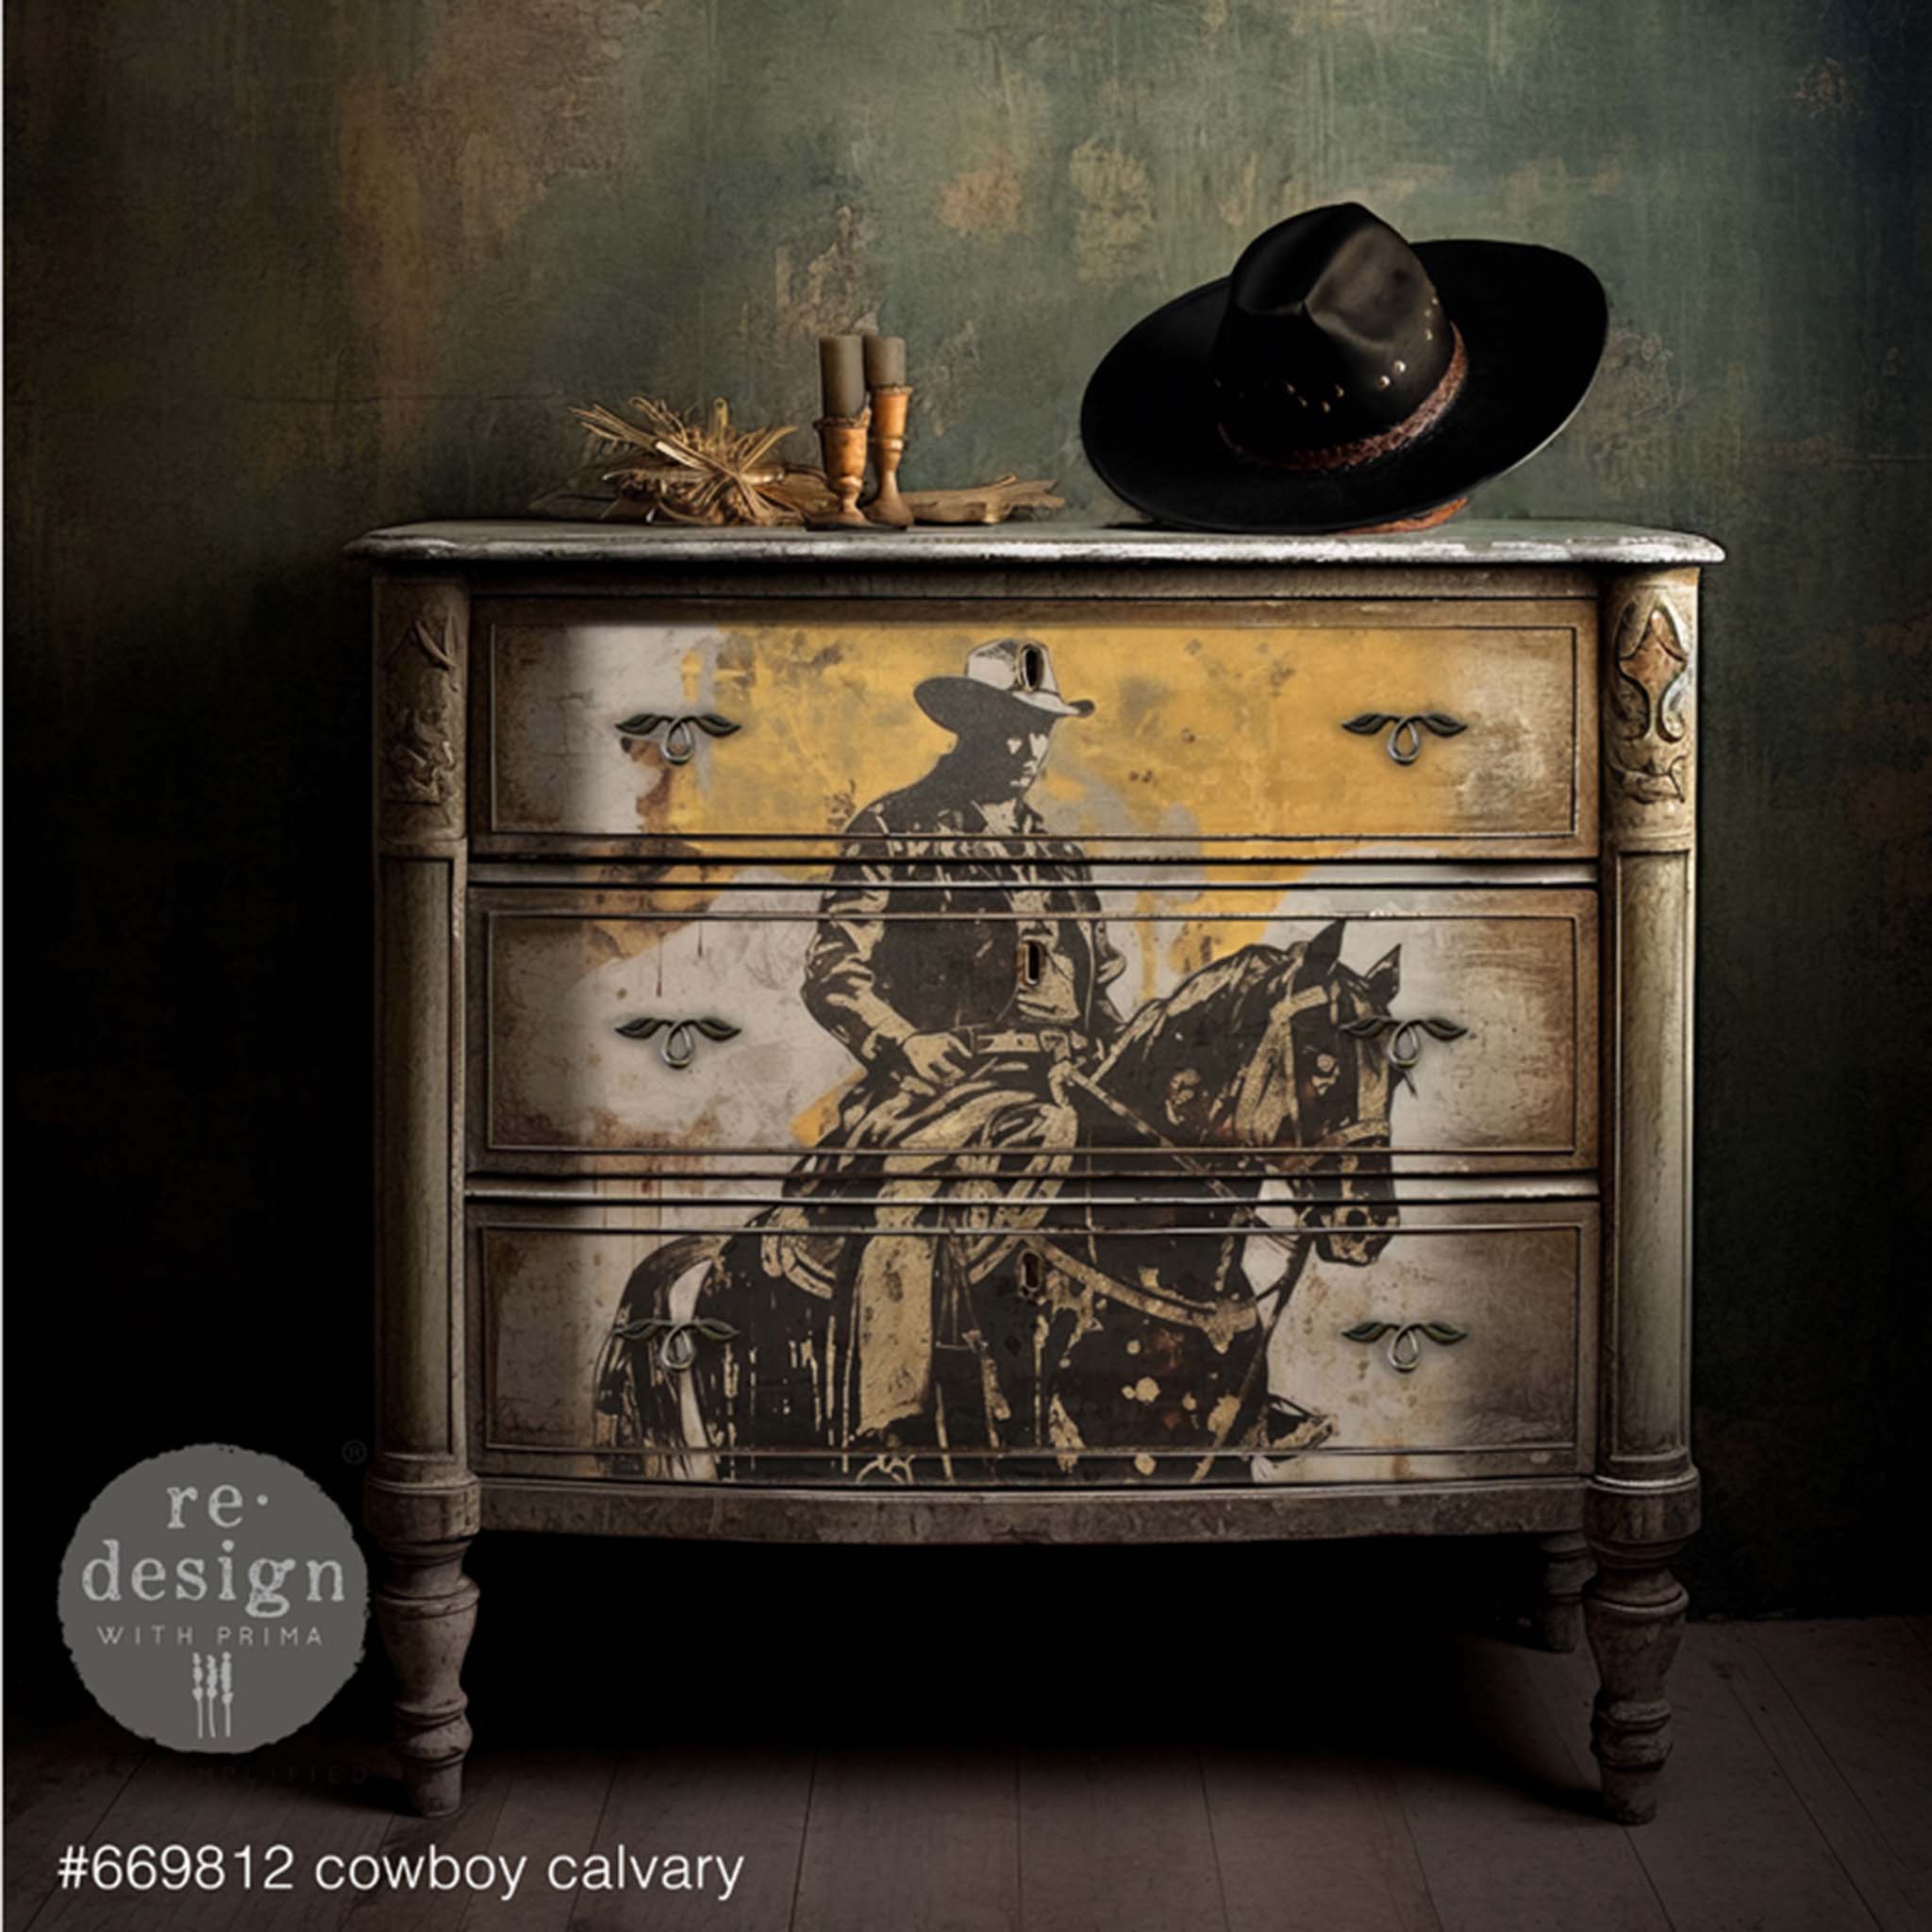 A vintage 3-drawer dresser features ReDesign with Prima's Cowboy Cavalry A1 fiber paper on the drawers.